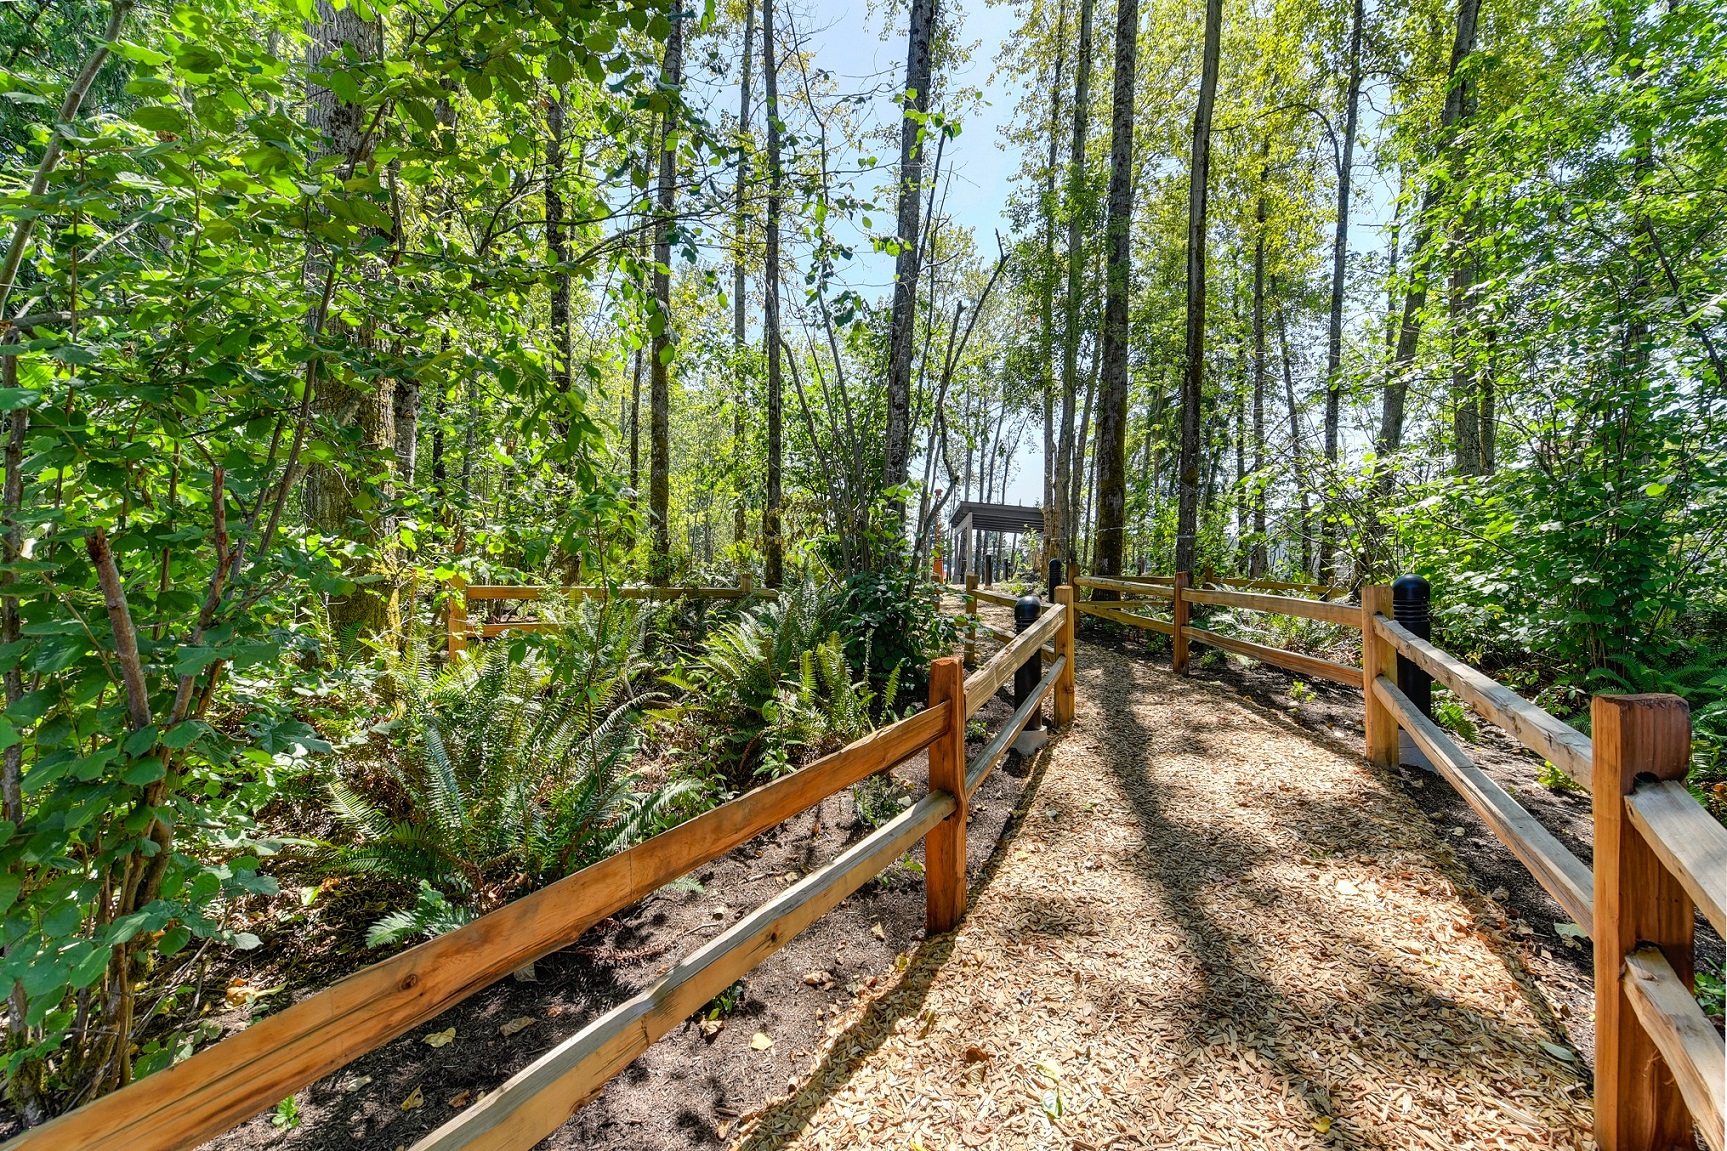 Walking Trail with Wood Chip Ground, Trees, and Wooden Fence